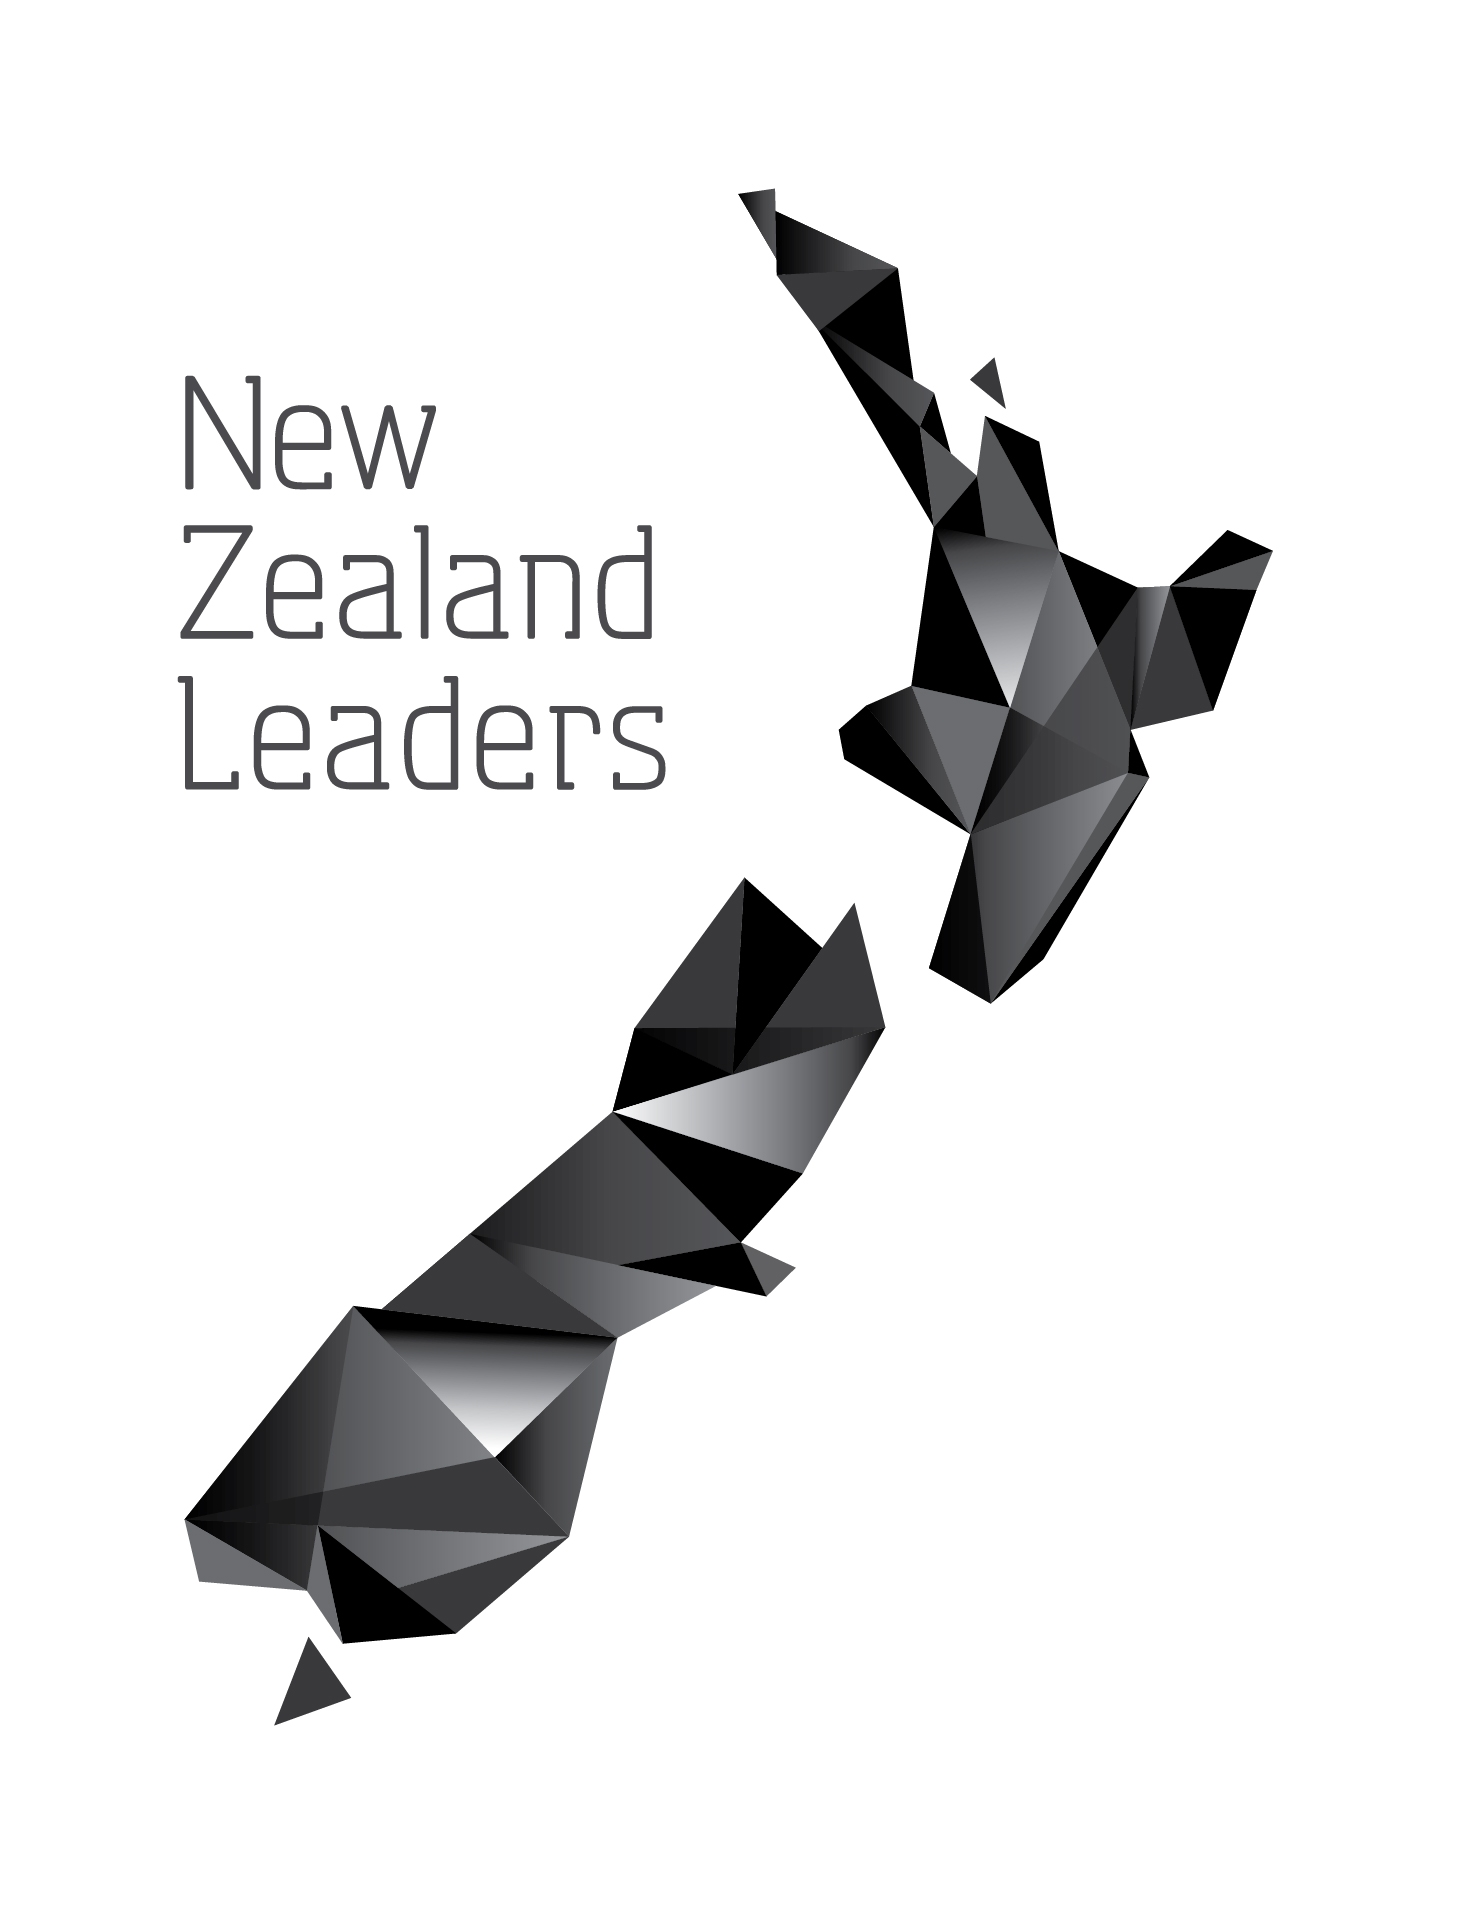 New Zealand Leaders develops pathways for business success